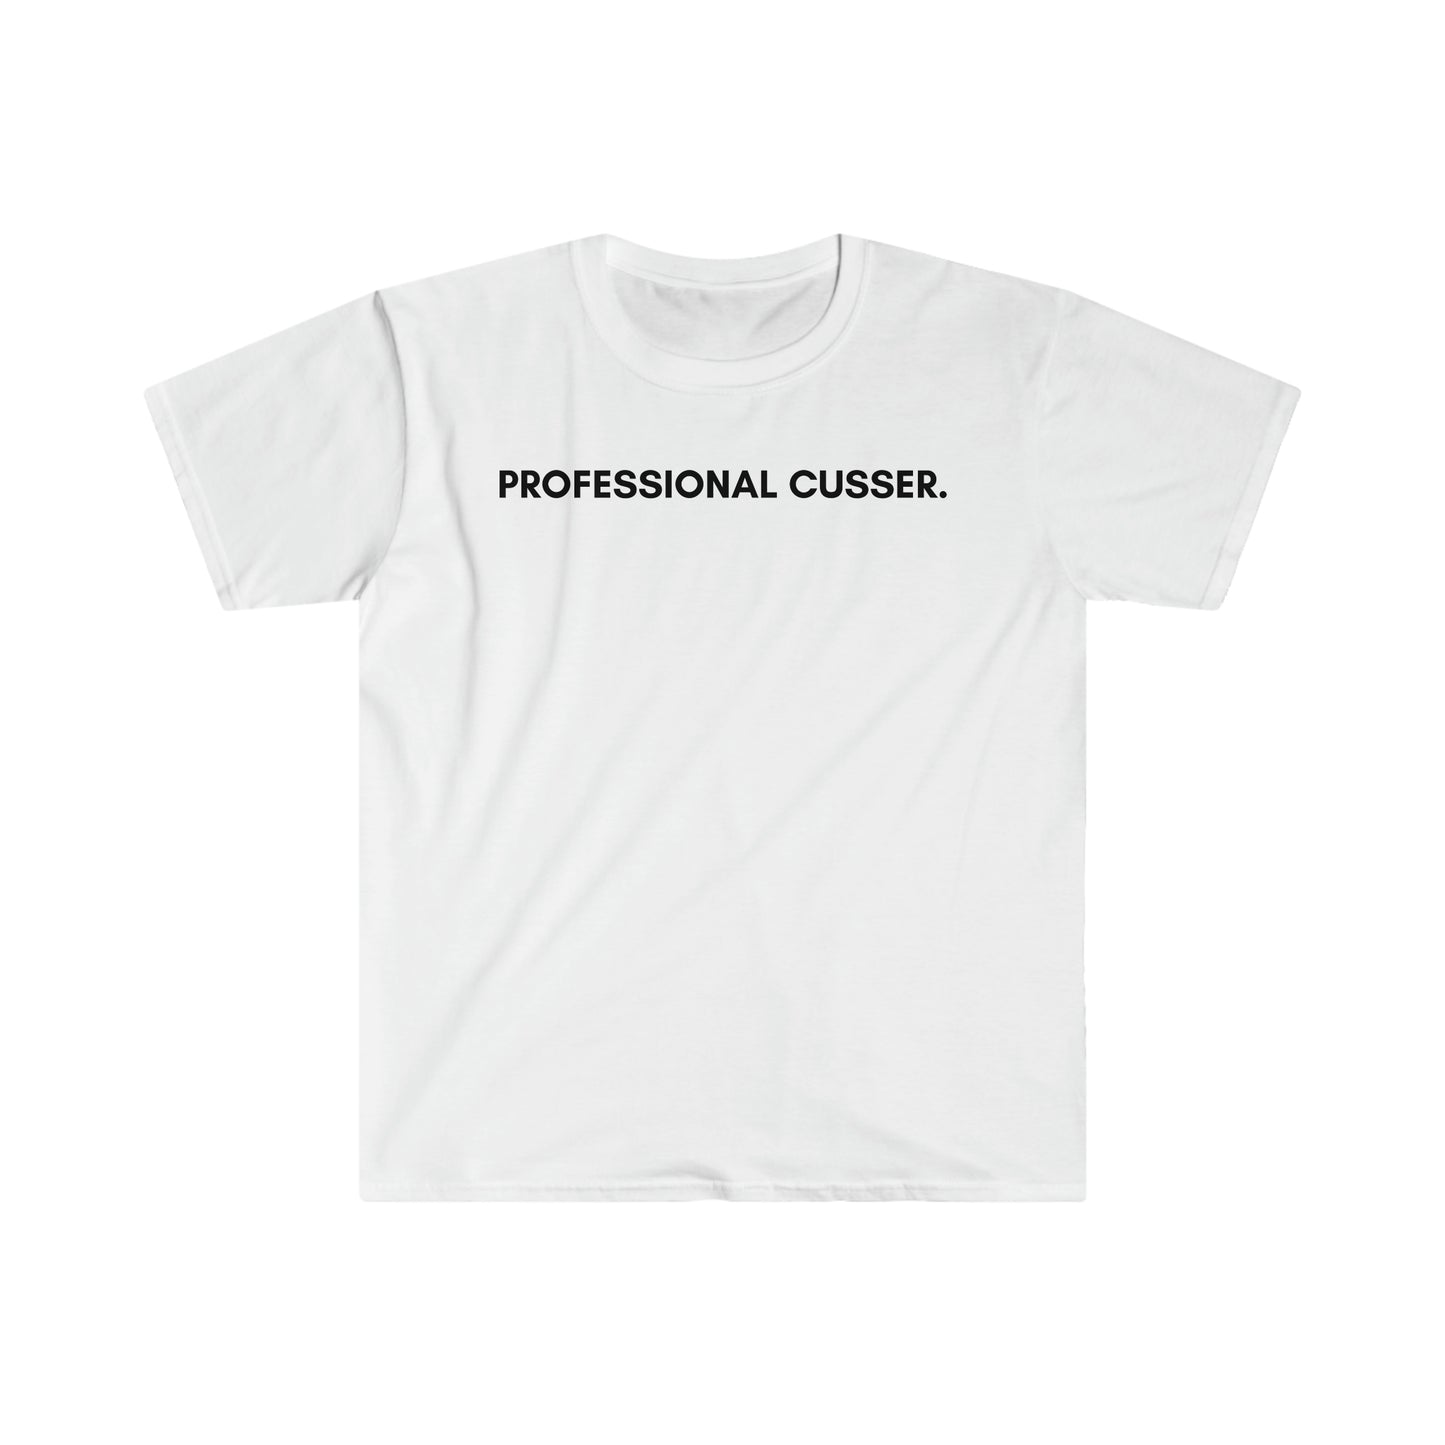 Professional Cusser - Unisex Softstyle T-Shirt